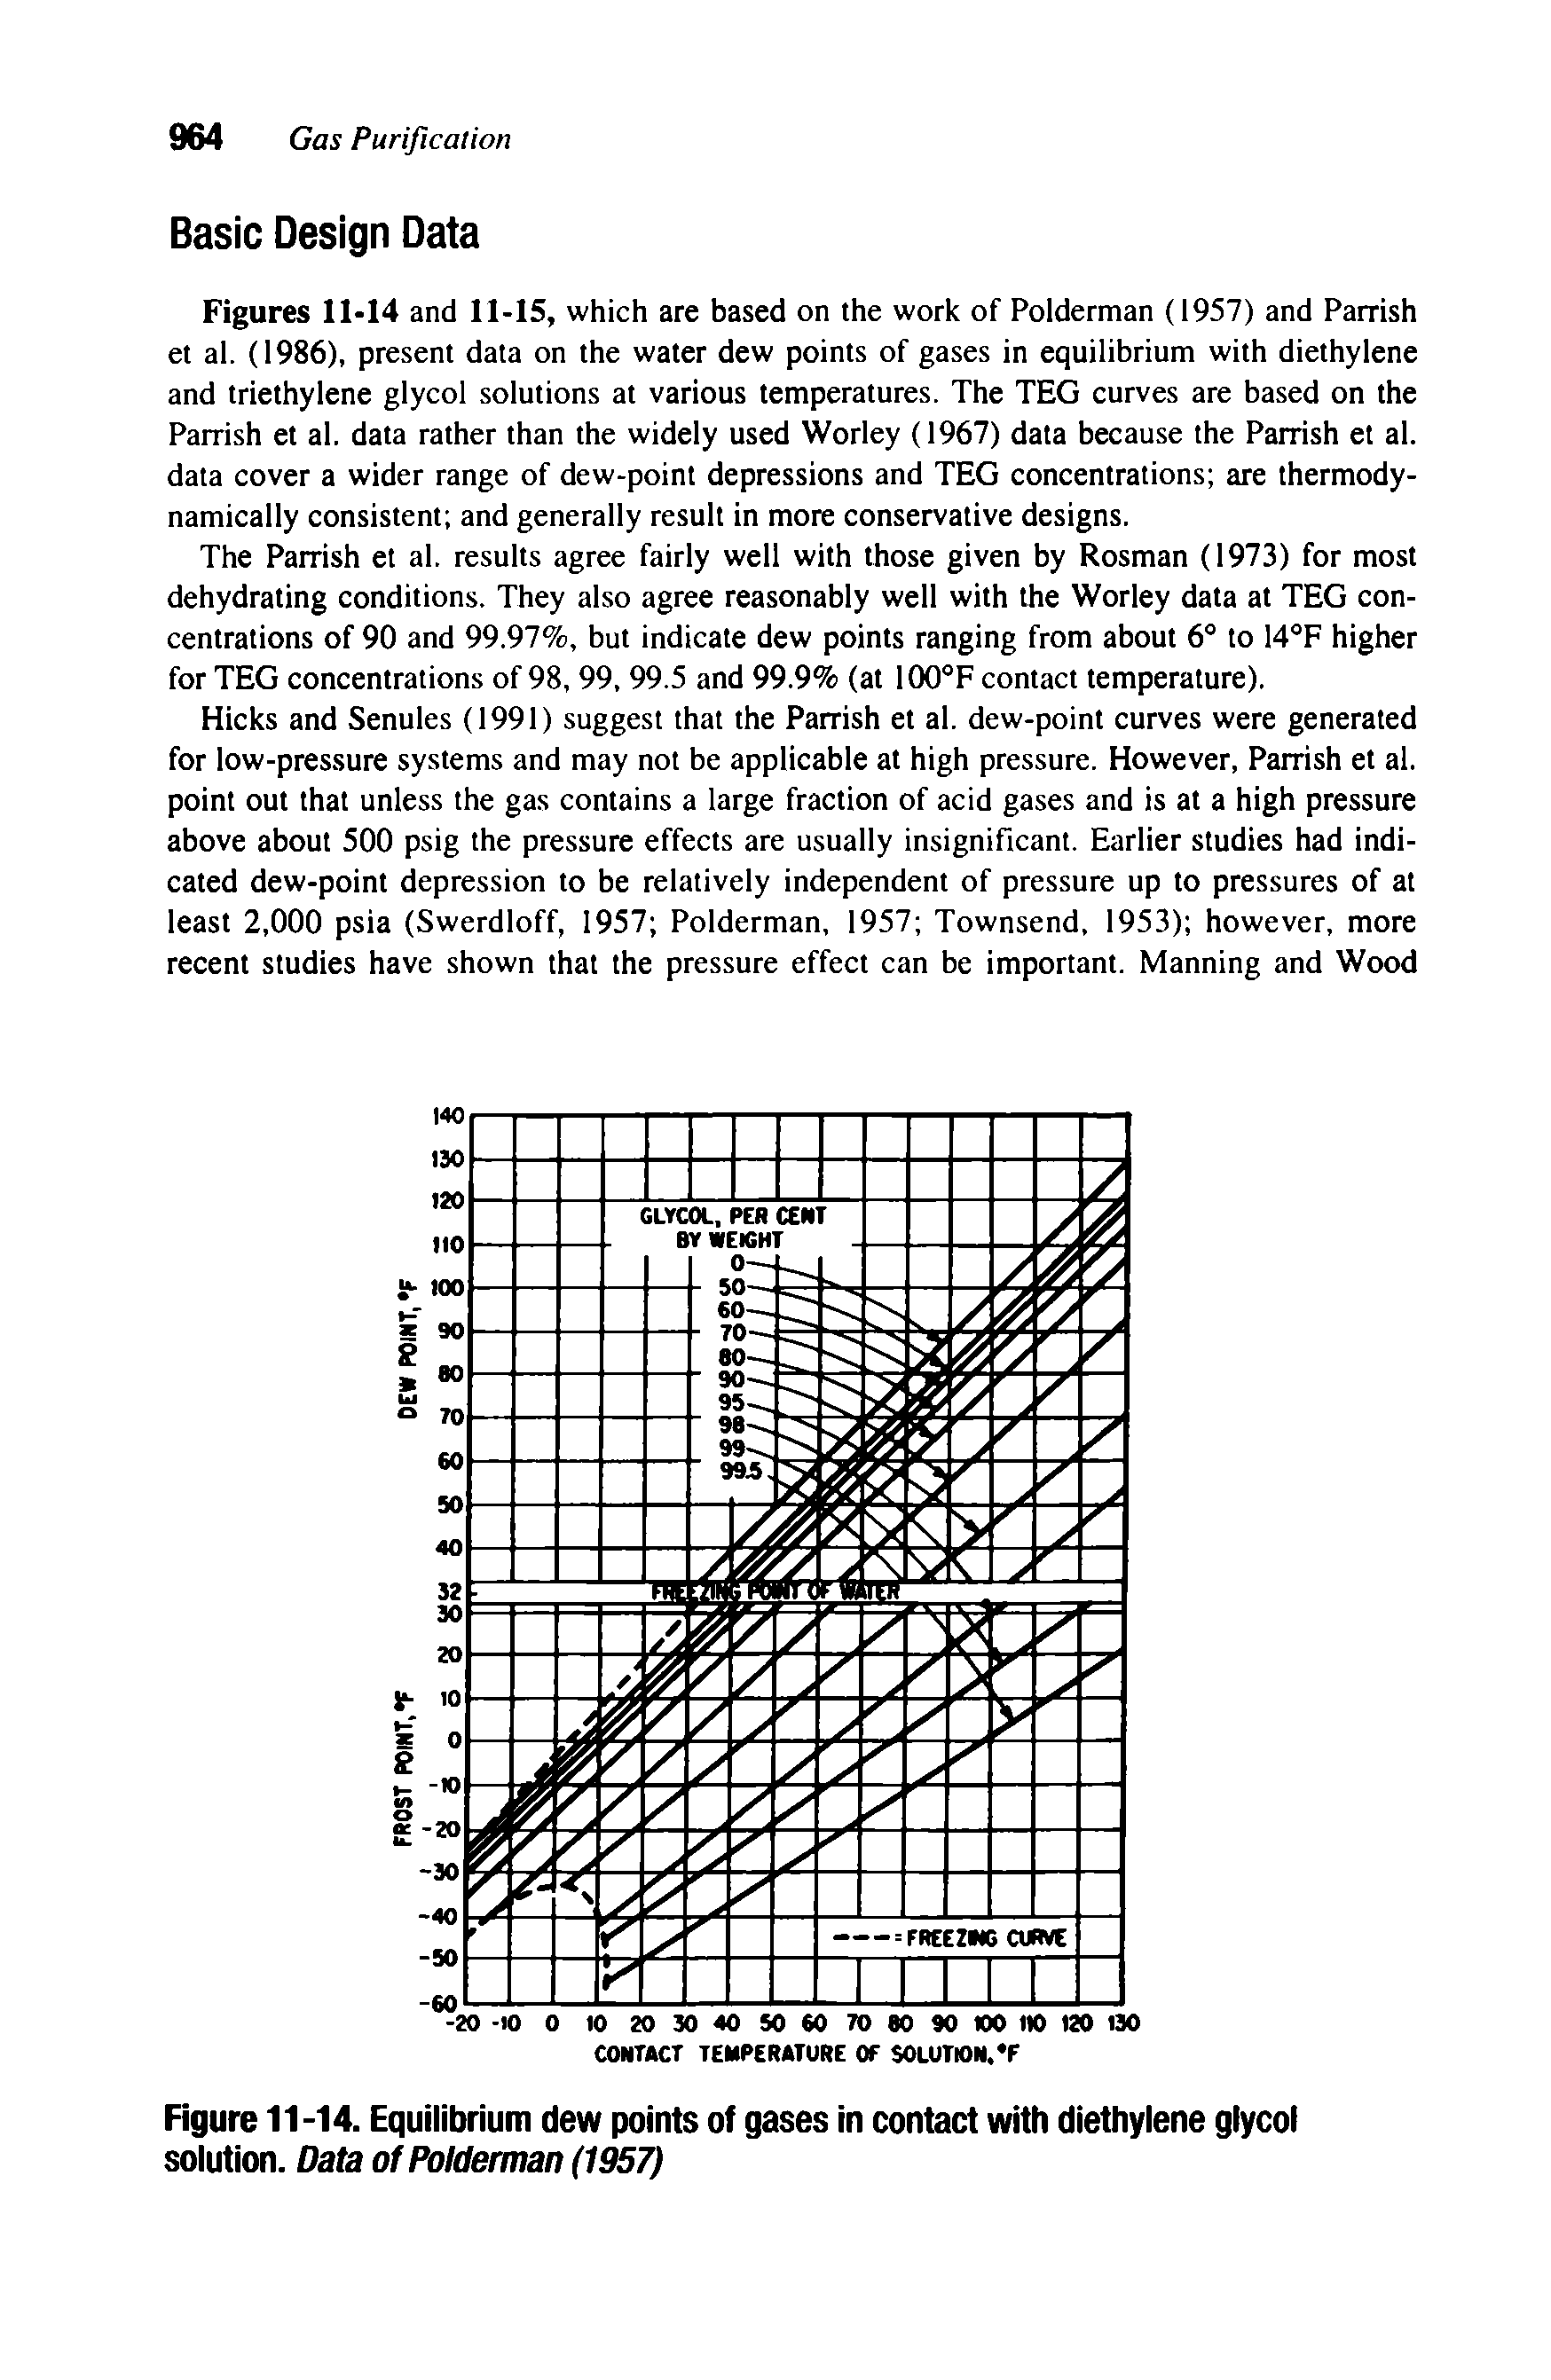 Figures 11-14 and 11-15, which are based on the work of Polderman (1957) and Parrish et al. (1986), present data on the water dew points of gases in equilibrium with diethylene and triethylene glycol solutions at various temperatures. The TEG curves are based on the Parrish et al. data rather than the widely used Worley (1967) data because the Parrish et al. data cover a wider range of dew-point depressions and TEG concentrations are thermodynamically consistent and generally result in more conservative designs.